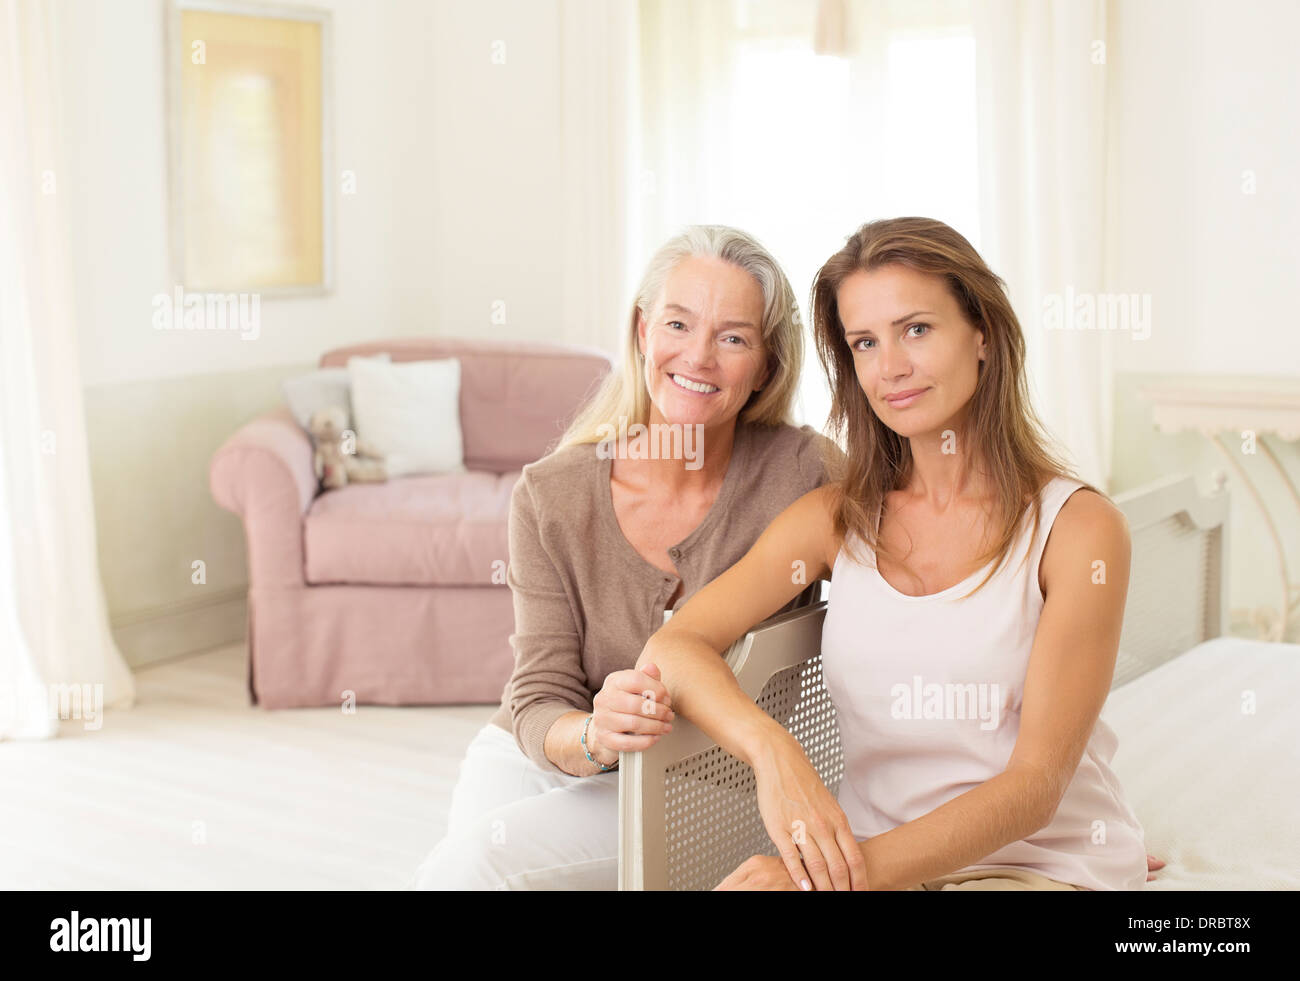 Mother and daughter smiling in bedroom Stock Photo